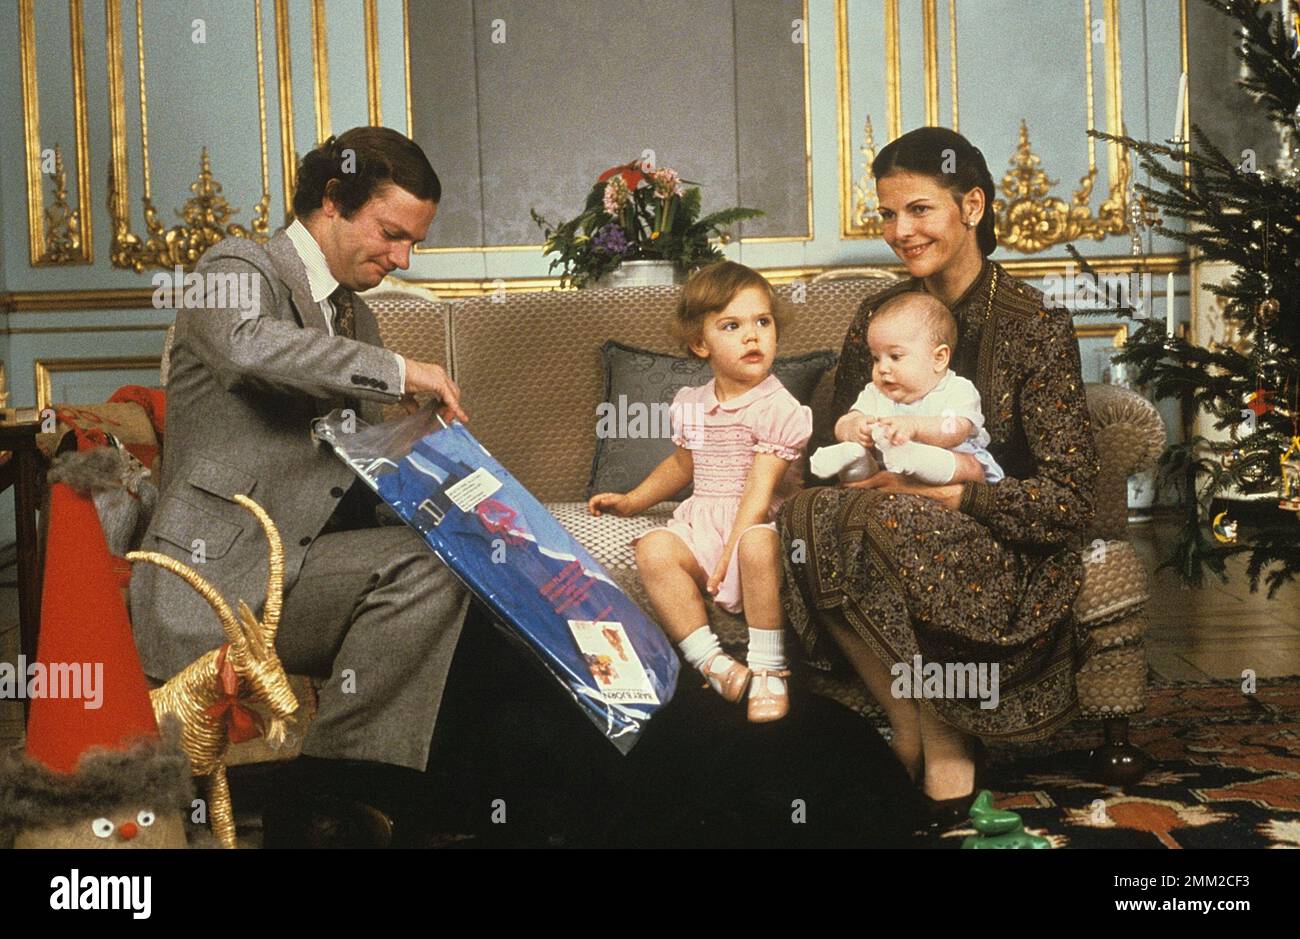 Carl XVI Gustaf, King of Sweden. Born 30 april 1946. Pictured with Queen Silvia and their daughters crown princess Victoria and princess Madeleine at christmas december 1979. Stock Photo